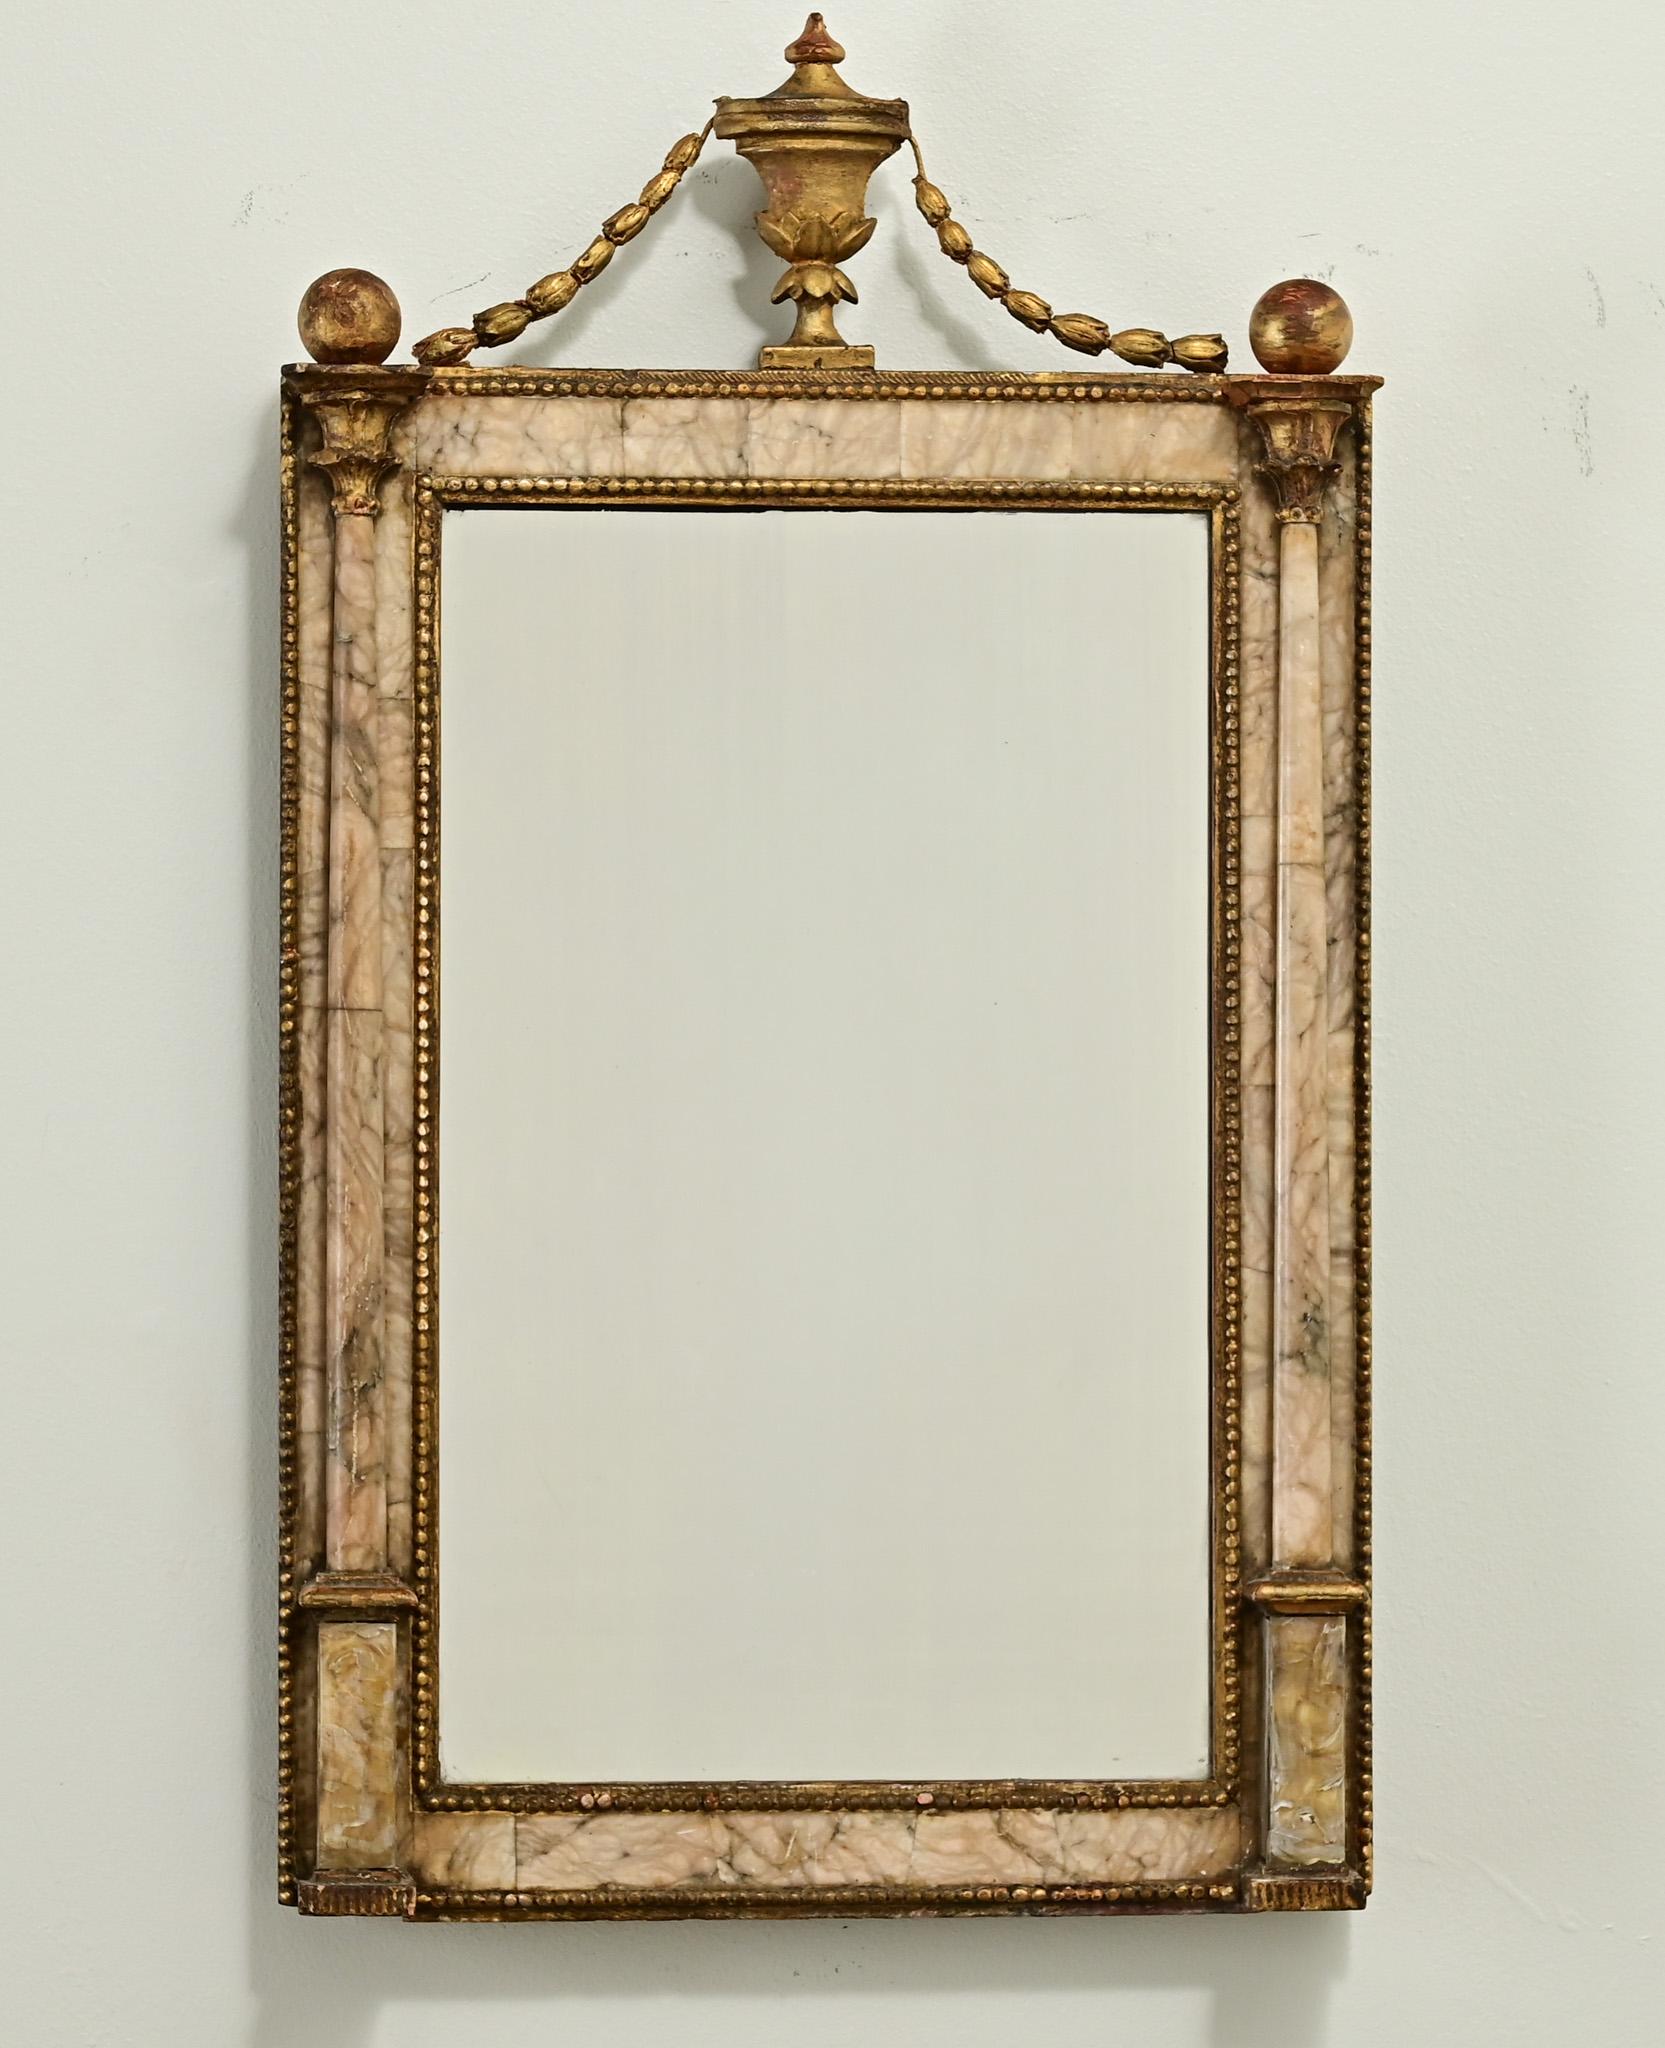 A petite and unique alabaster mirror from 19th Century France. The top features a gold gilt urn with garland and ball finials. The carved and applied alabaster mirror frame has a beaded brass trim and alabaster columns. Be sure to view the detailed